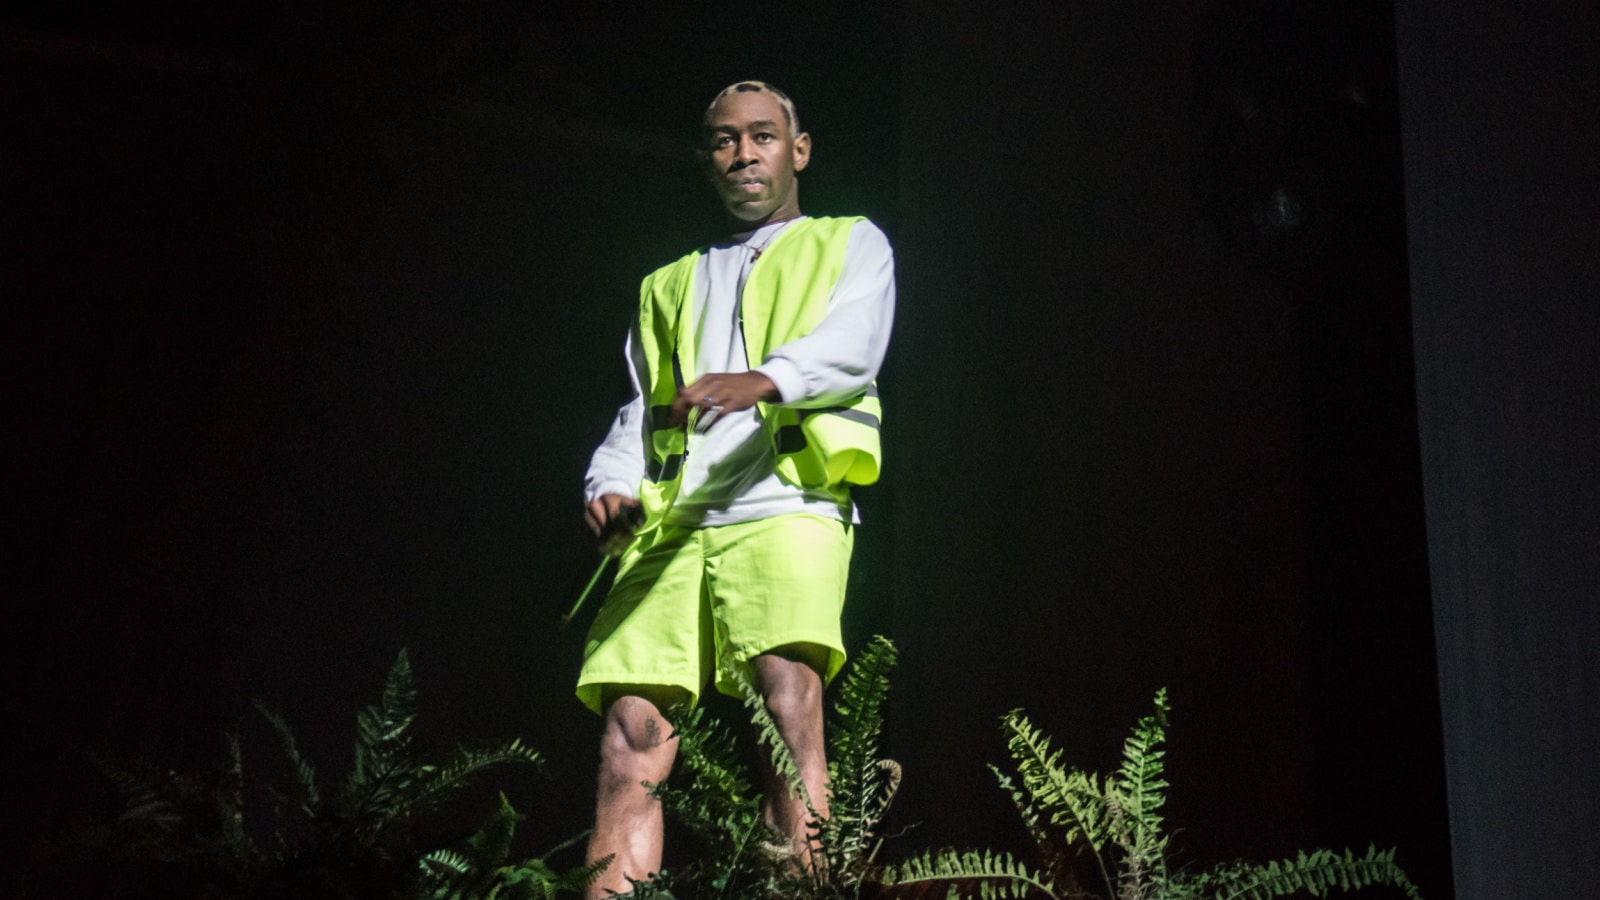 SAN FRANCISO, CA - JANUARY 29, 2018: Tyler, the Creator in concert at The Armory in San Francisco, CA